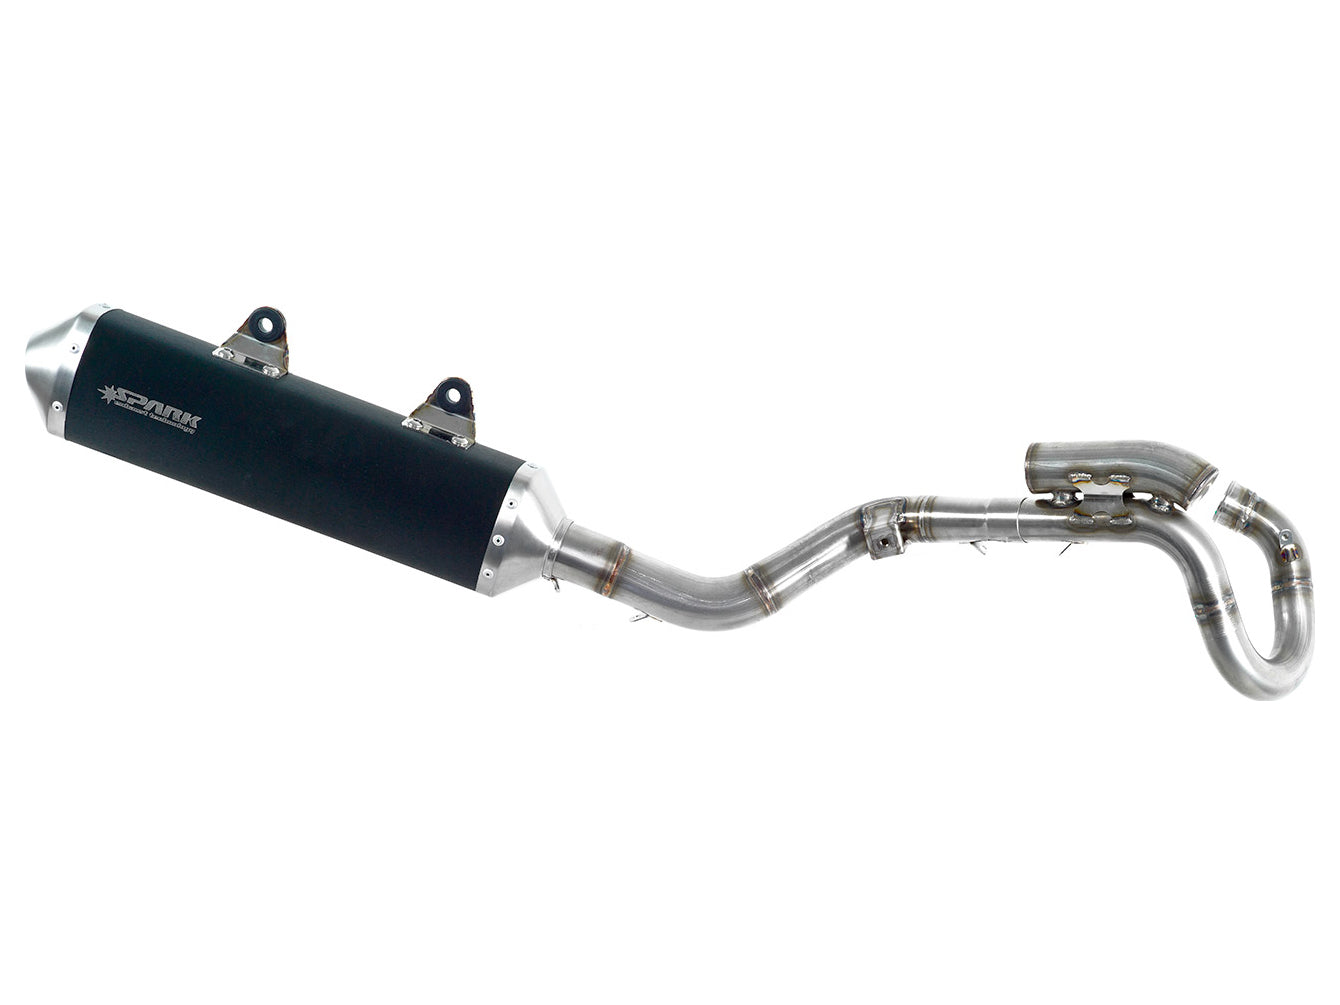 SPARK GKT8005 KTM SX-F 250 / EXC-F 250 (14/16) Full Exhaust System "Off Road" (racing)